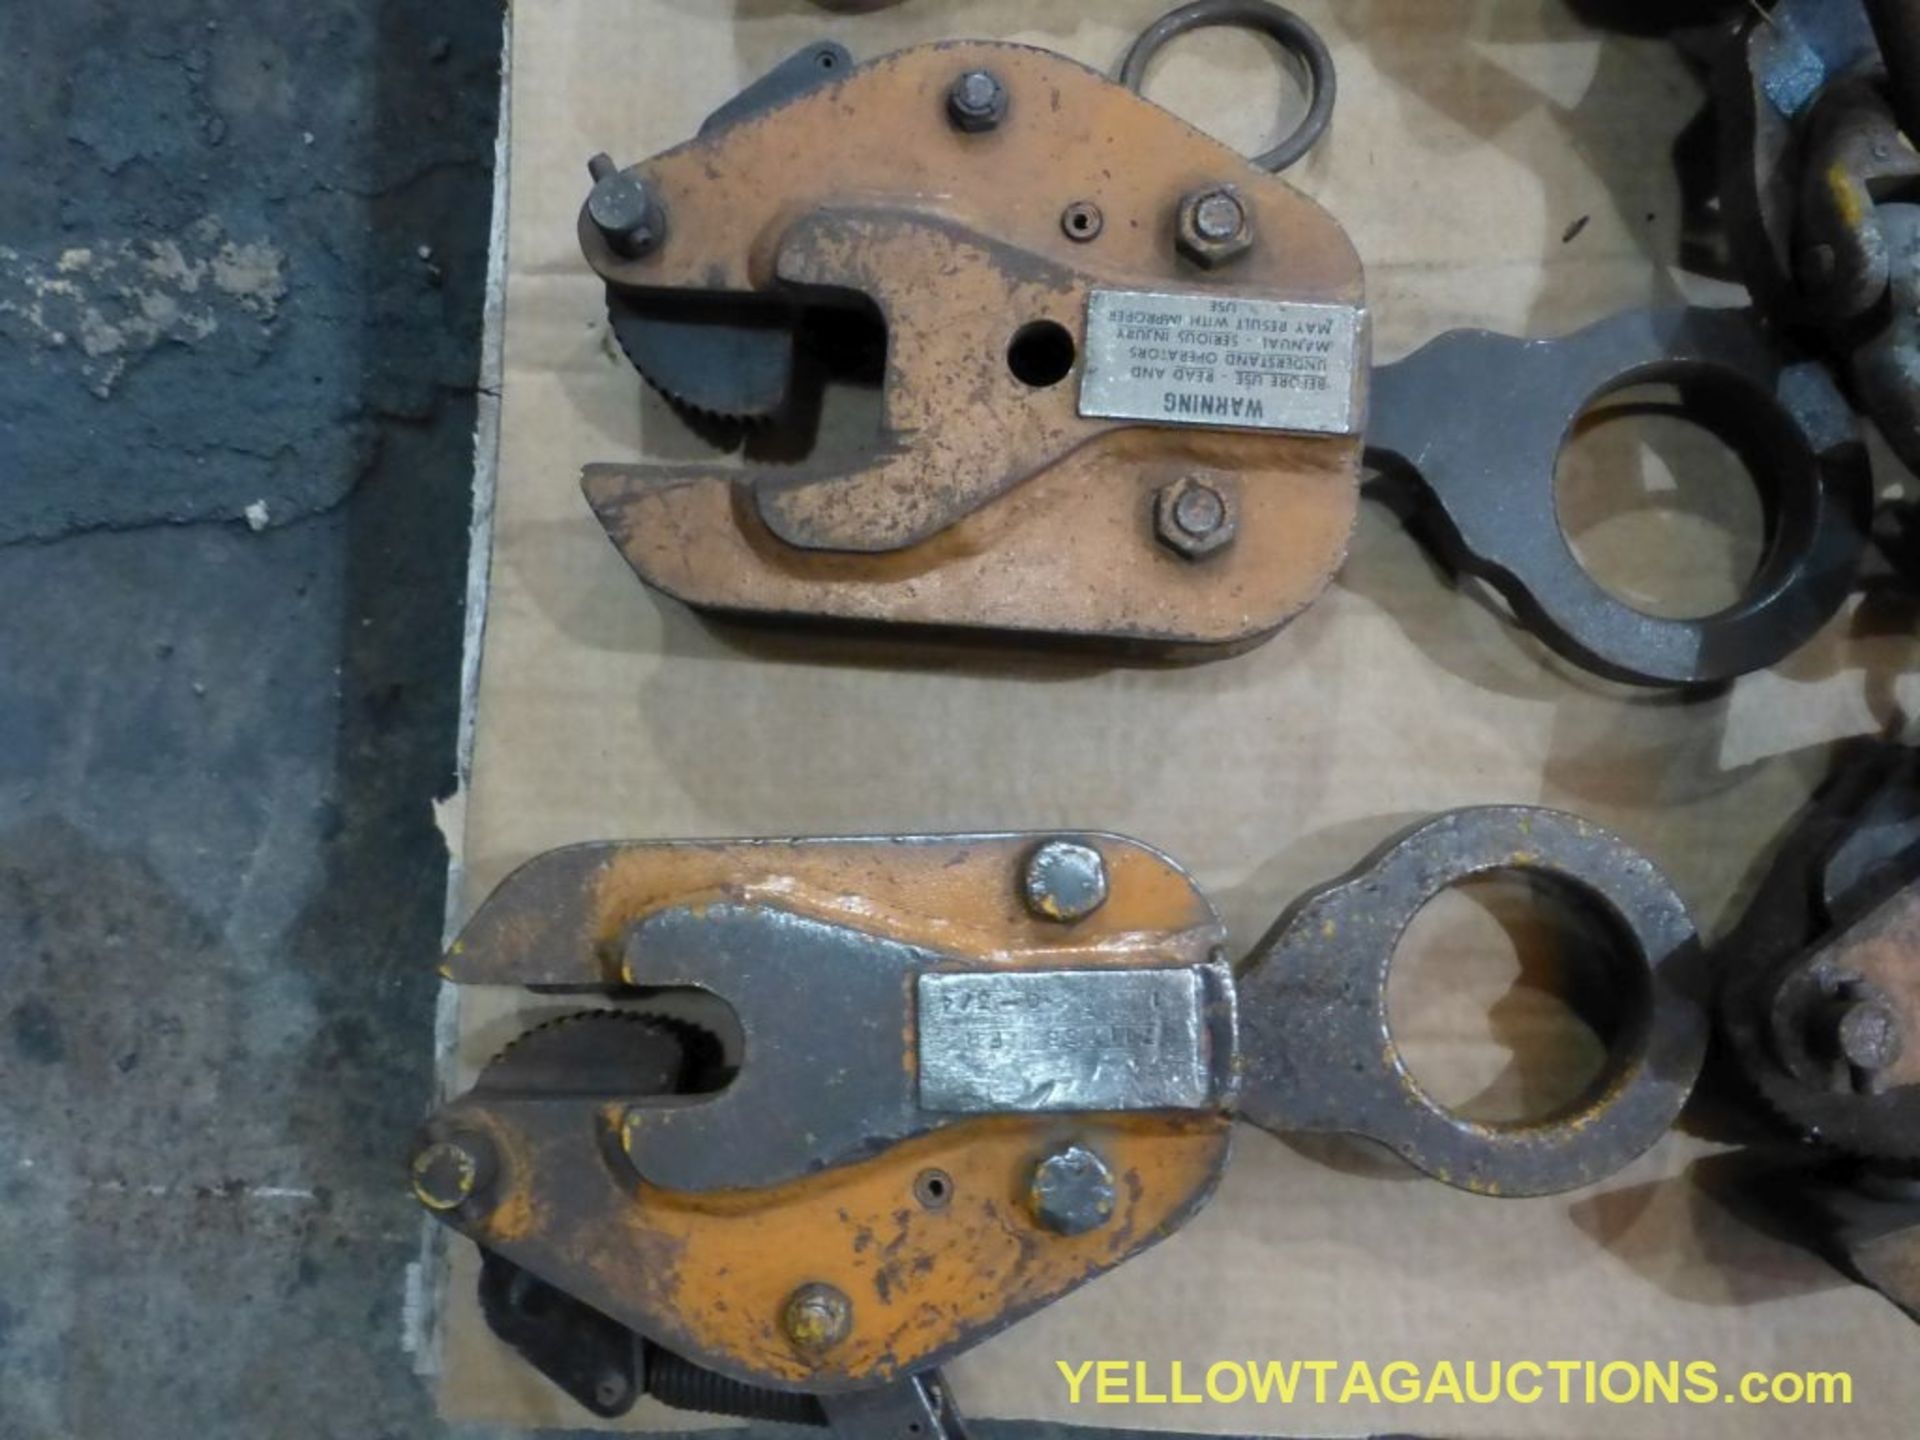 Lot of Assorted Lifting Clamps and Chain Slings - Image 3 of 6